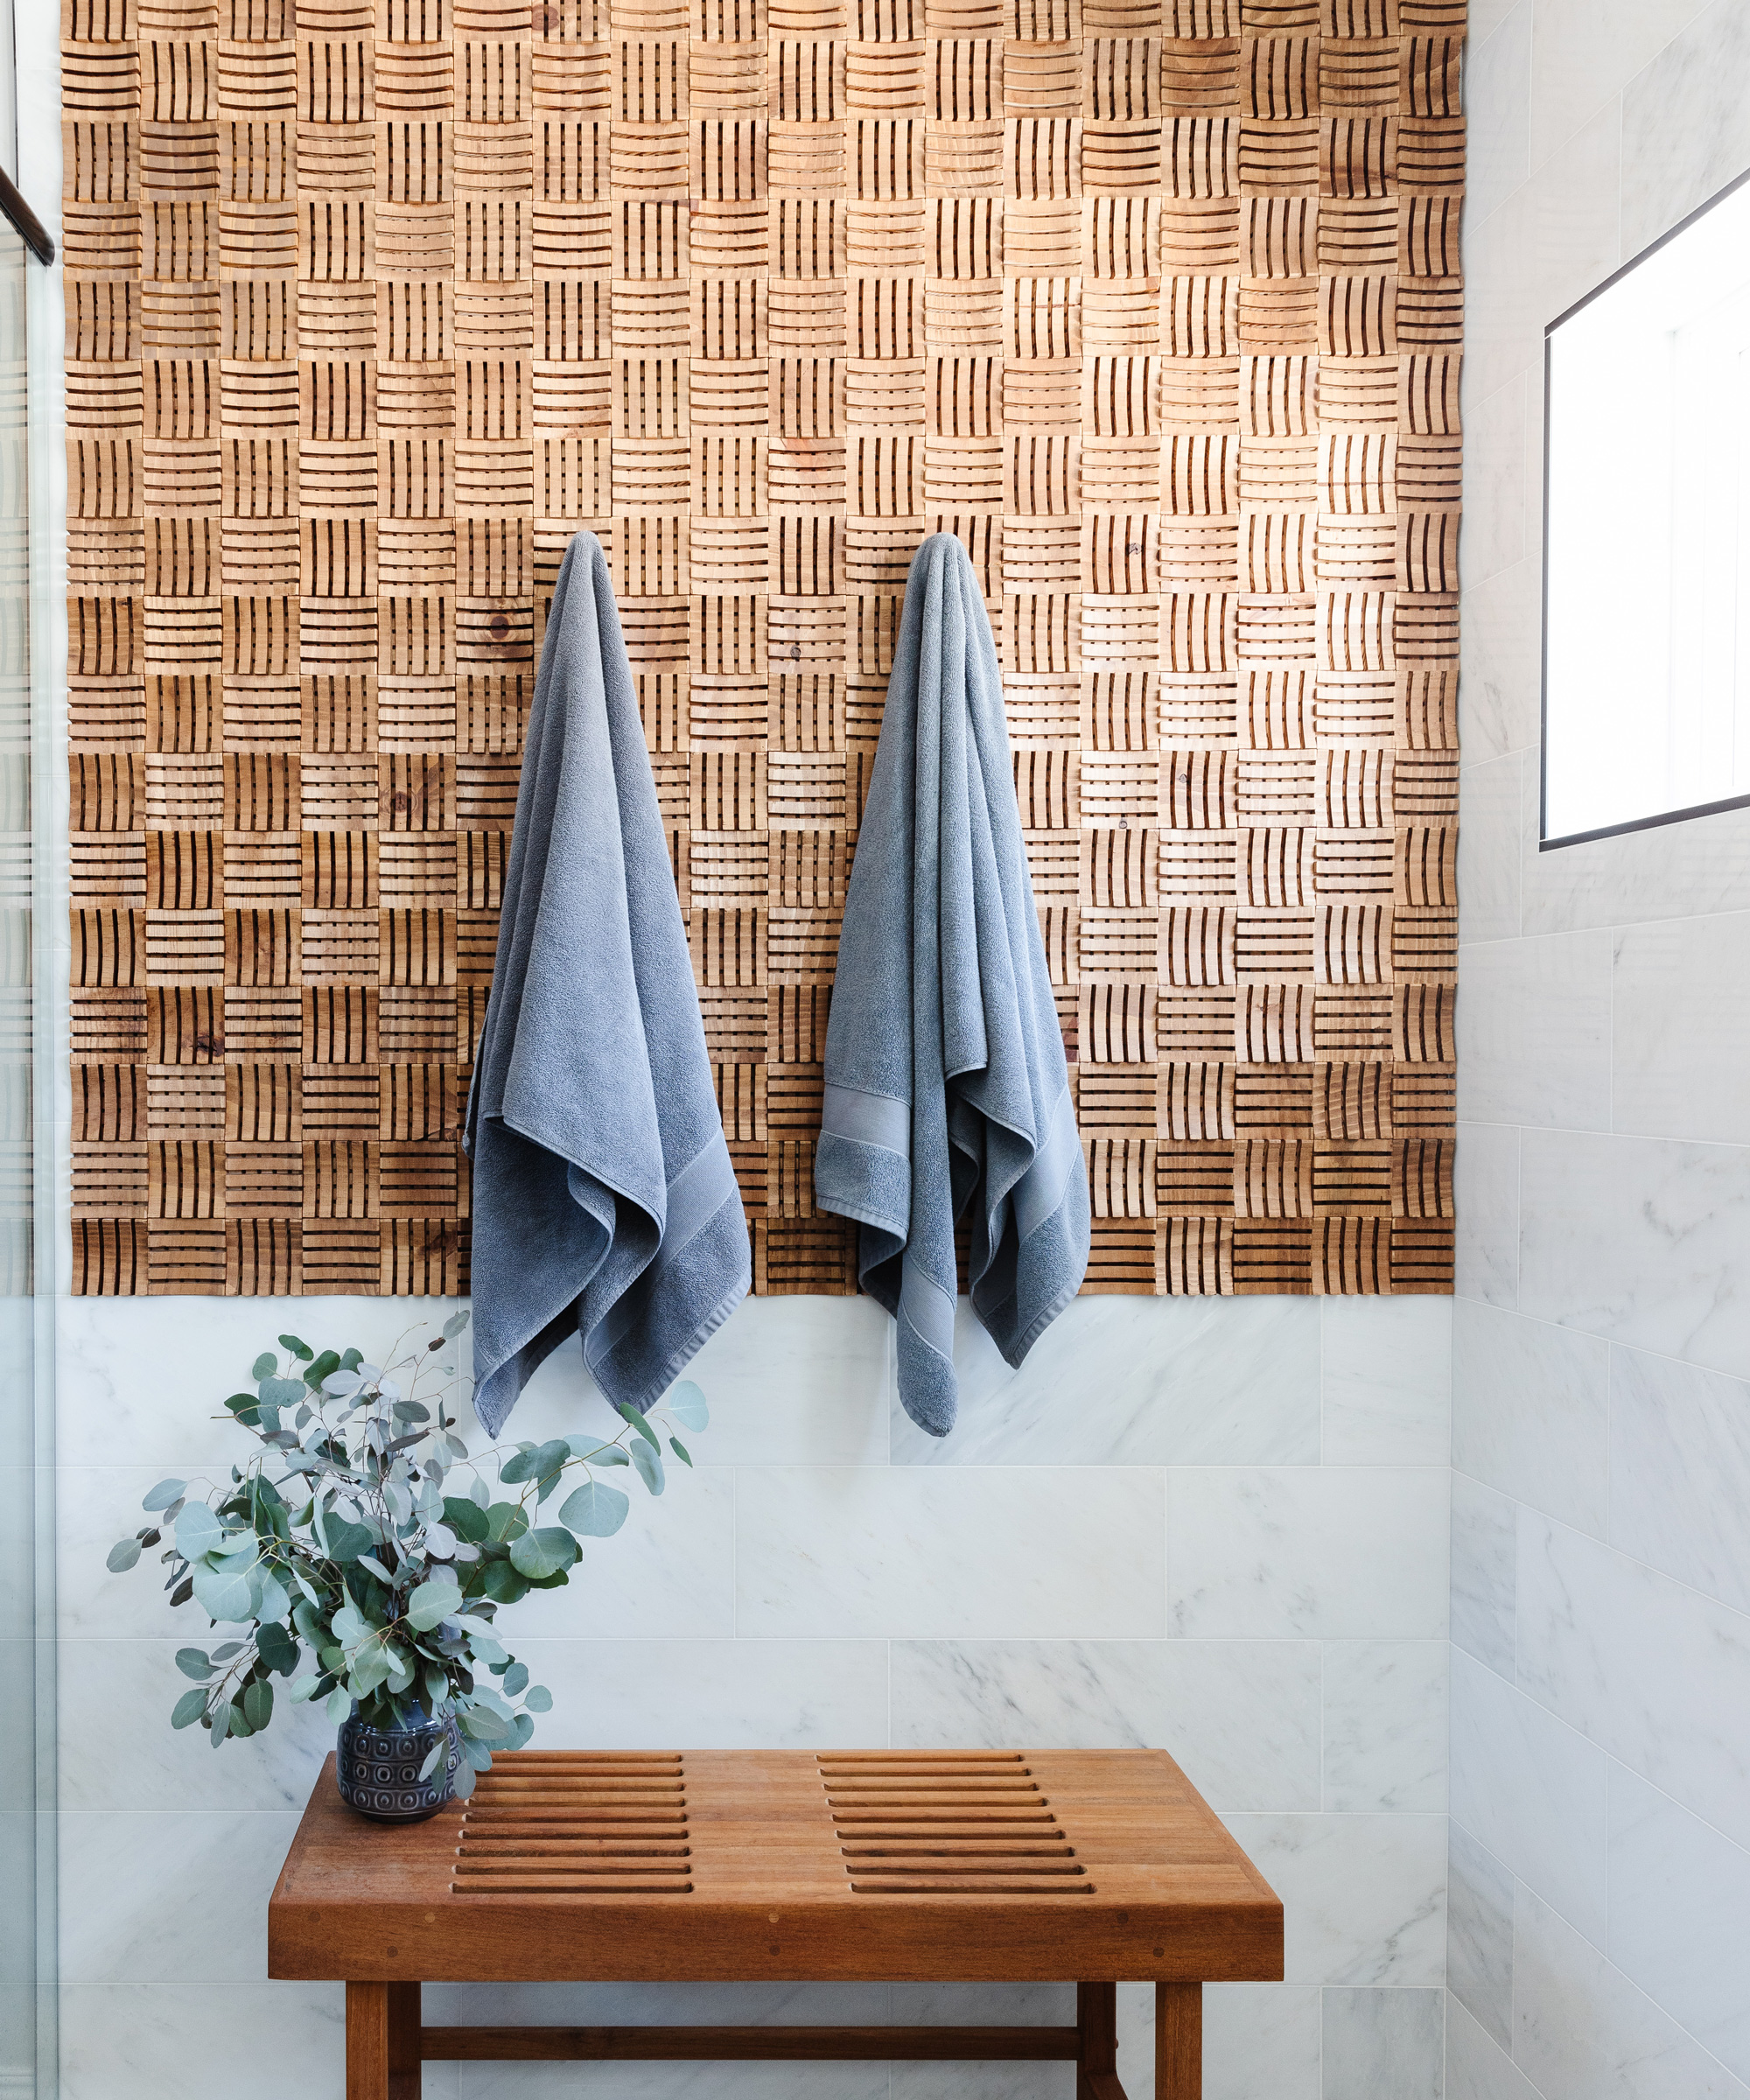 Spa style bathroom with tactile wood panel design on wall.